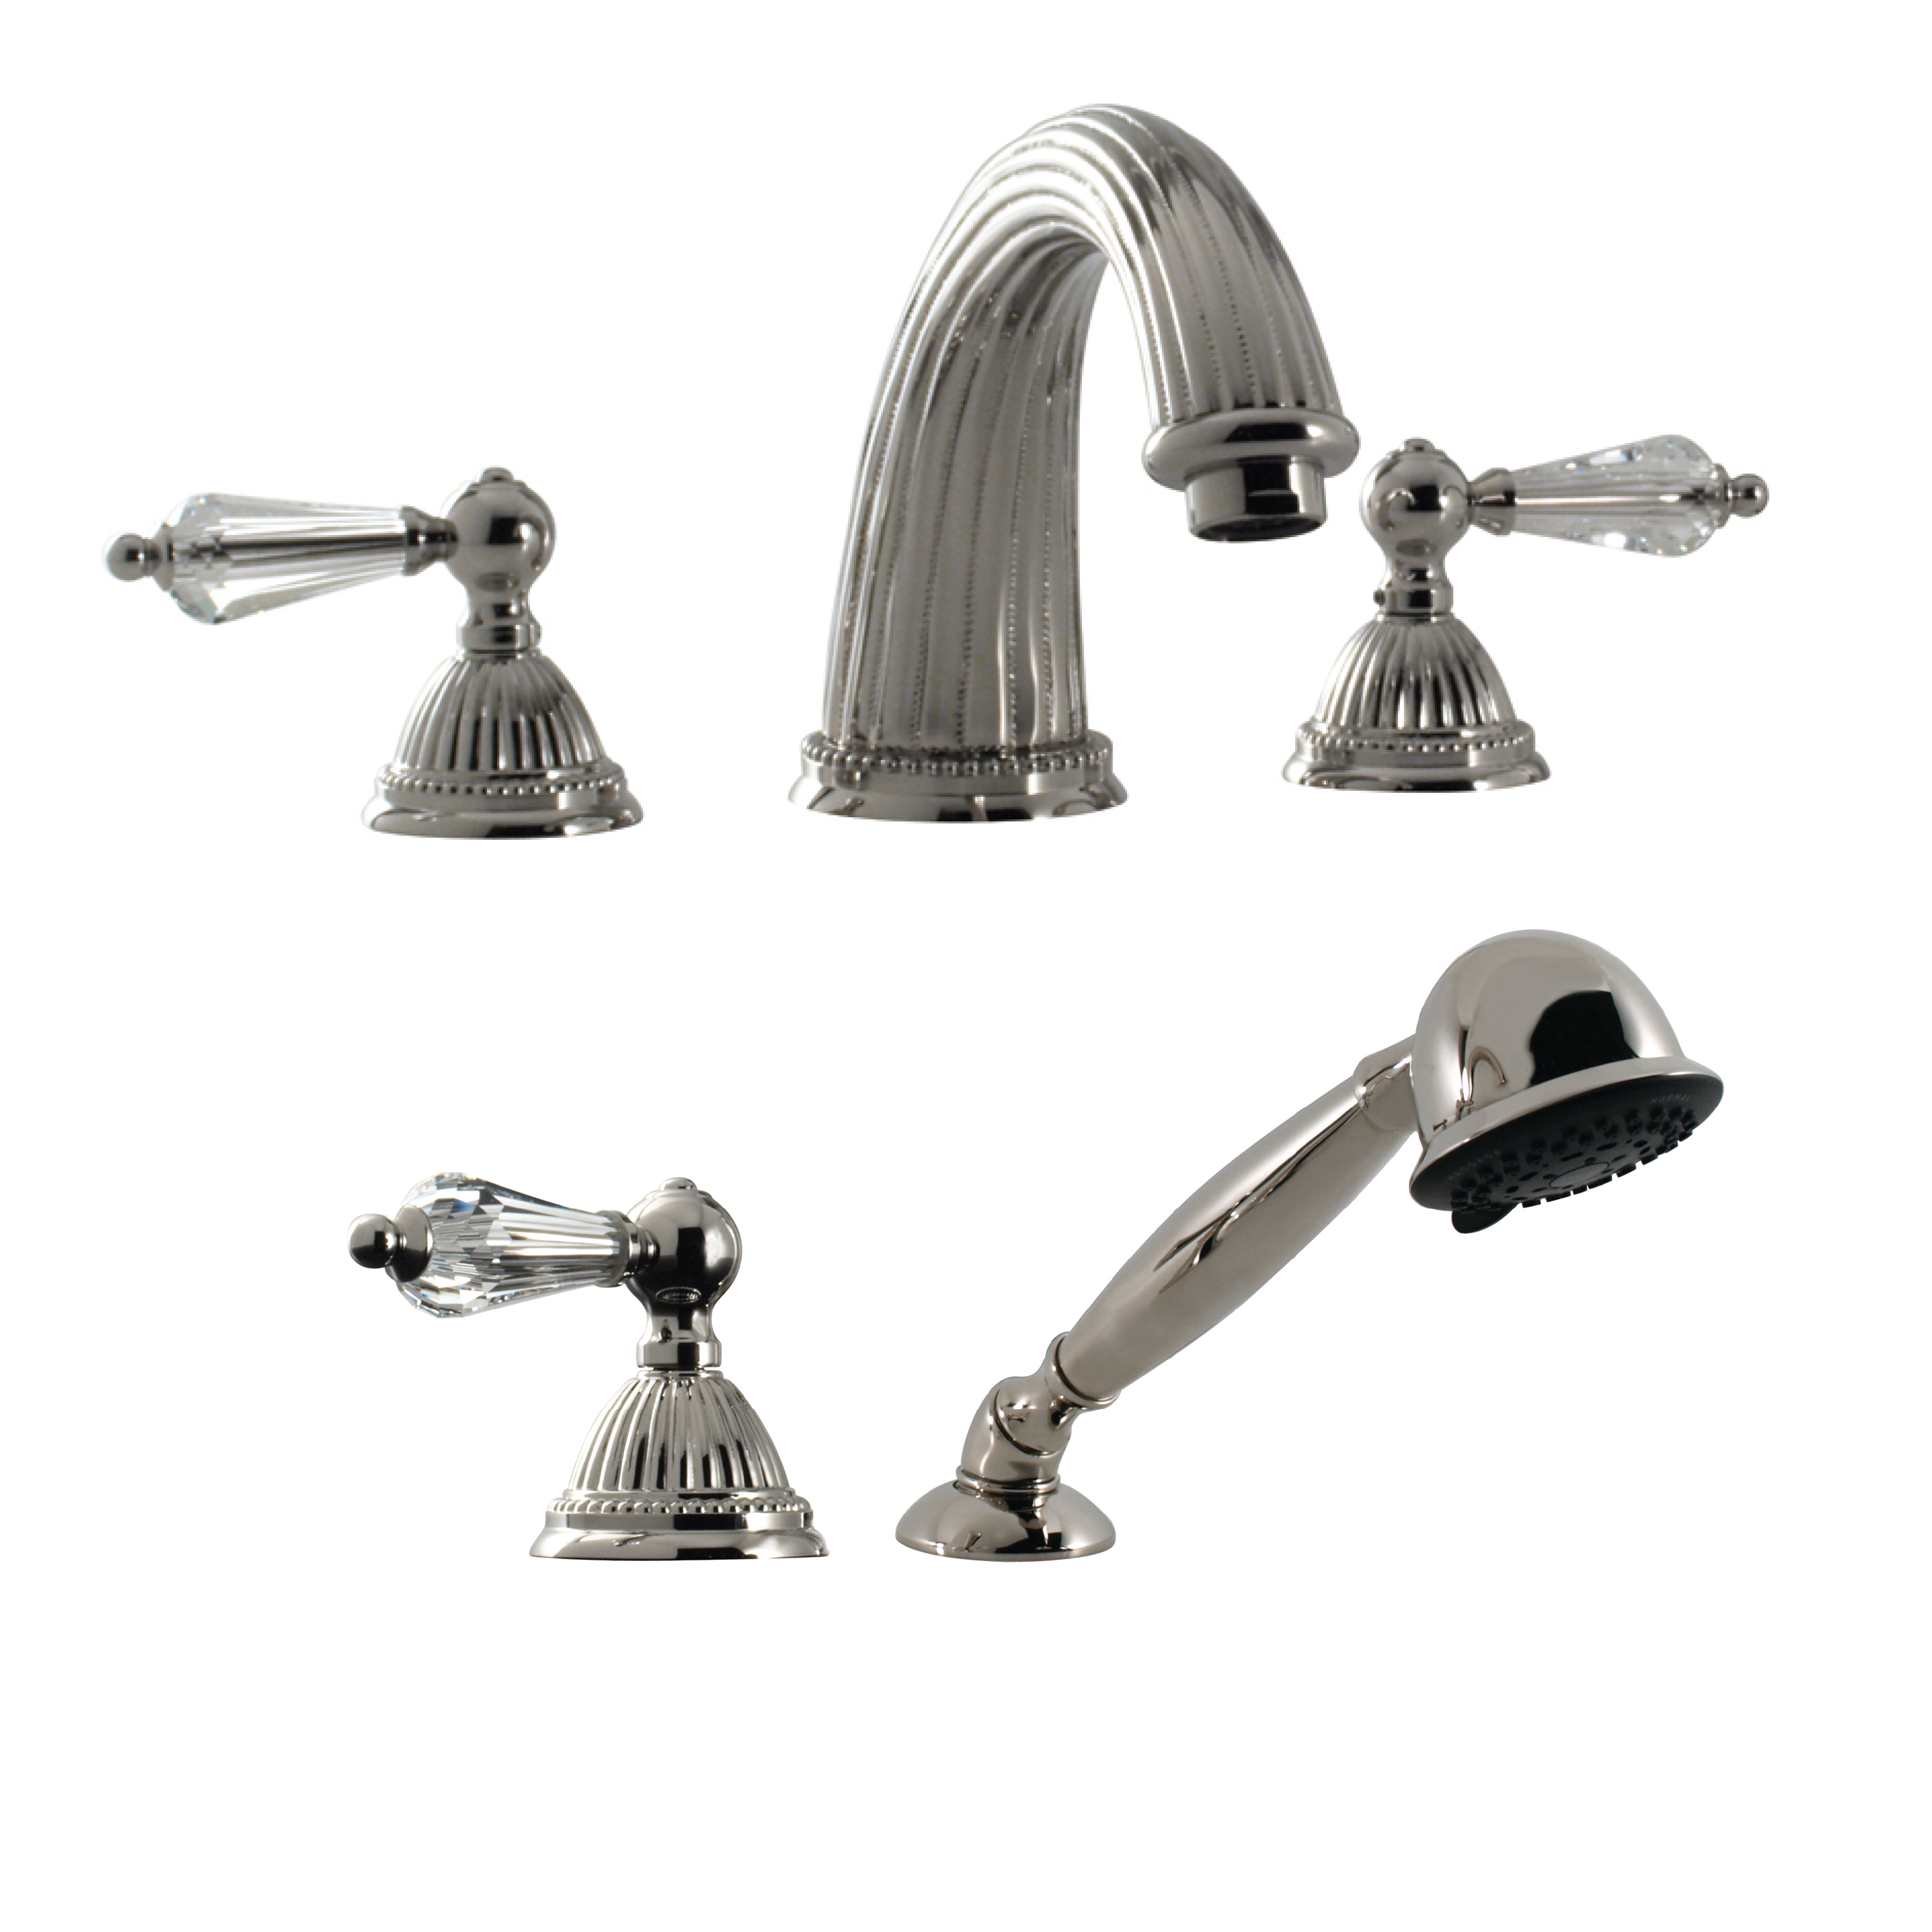 Santec 1155LC10-TM Roman Tub Filler Set with Hand Held Shower with "LC" Handles - Polished Chrome